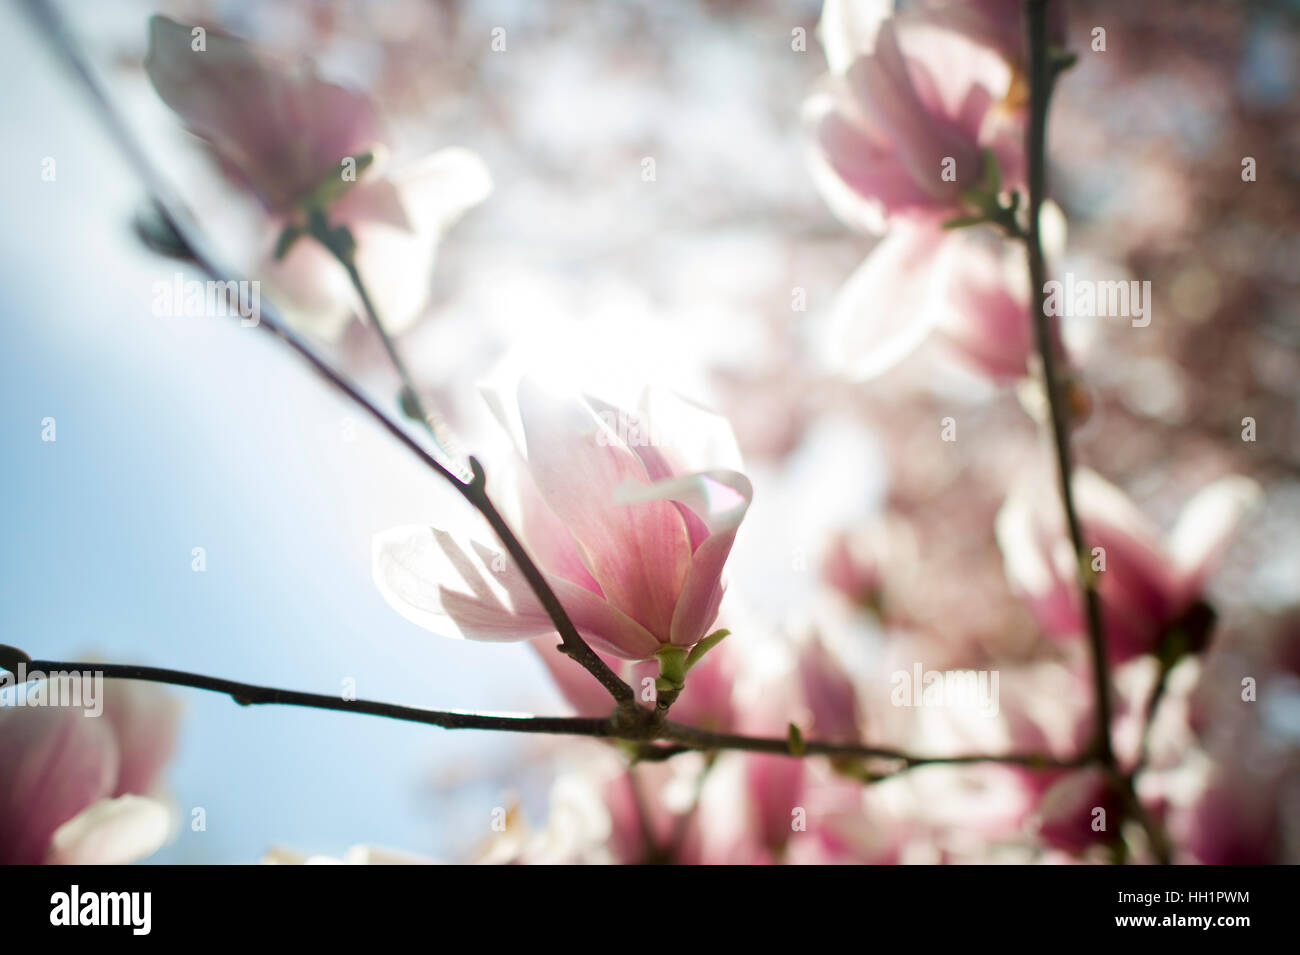 Magnolia tree blossoms back-lit by the bright sumemr sun. Stock Photo